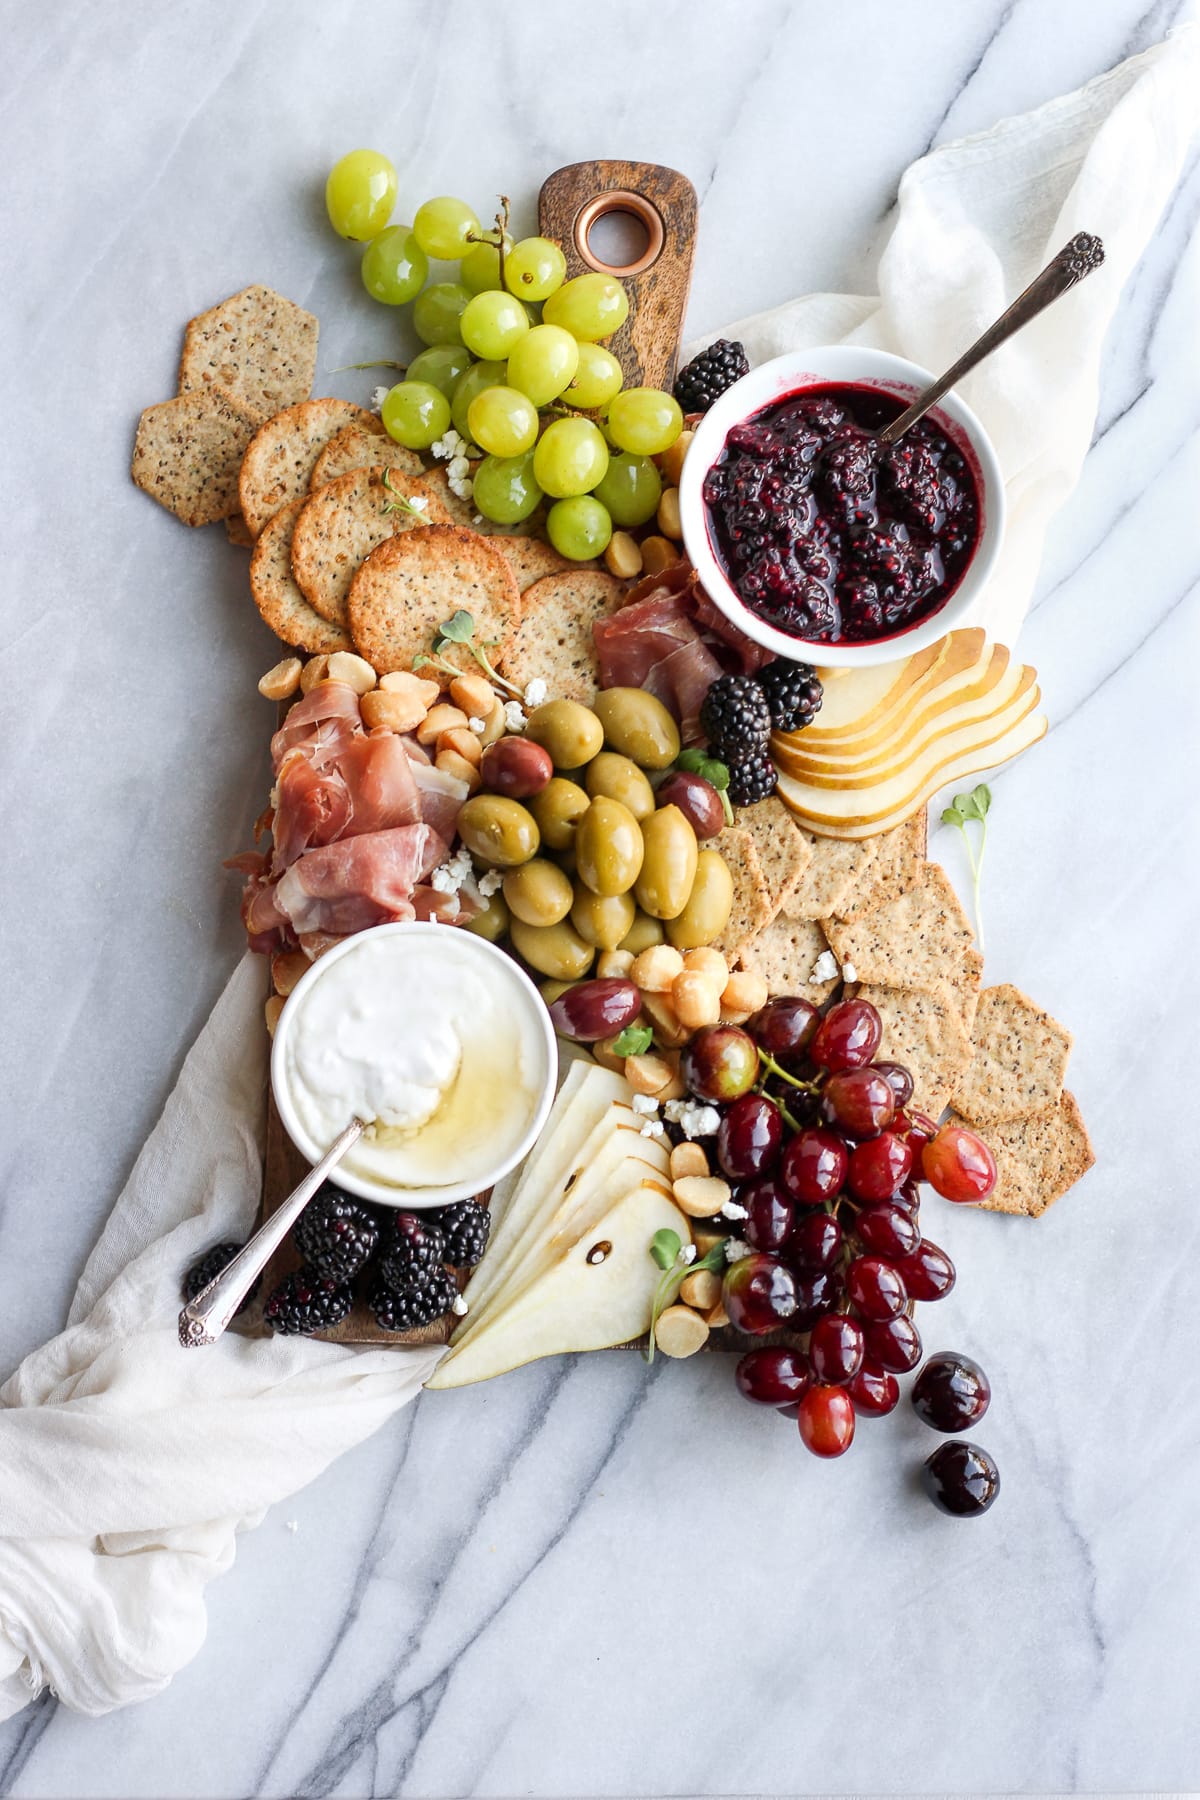 A charcuterie board with grapes, olives, spreads, meats, and cheeses.